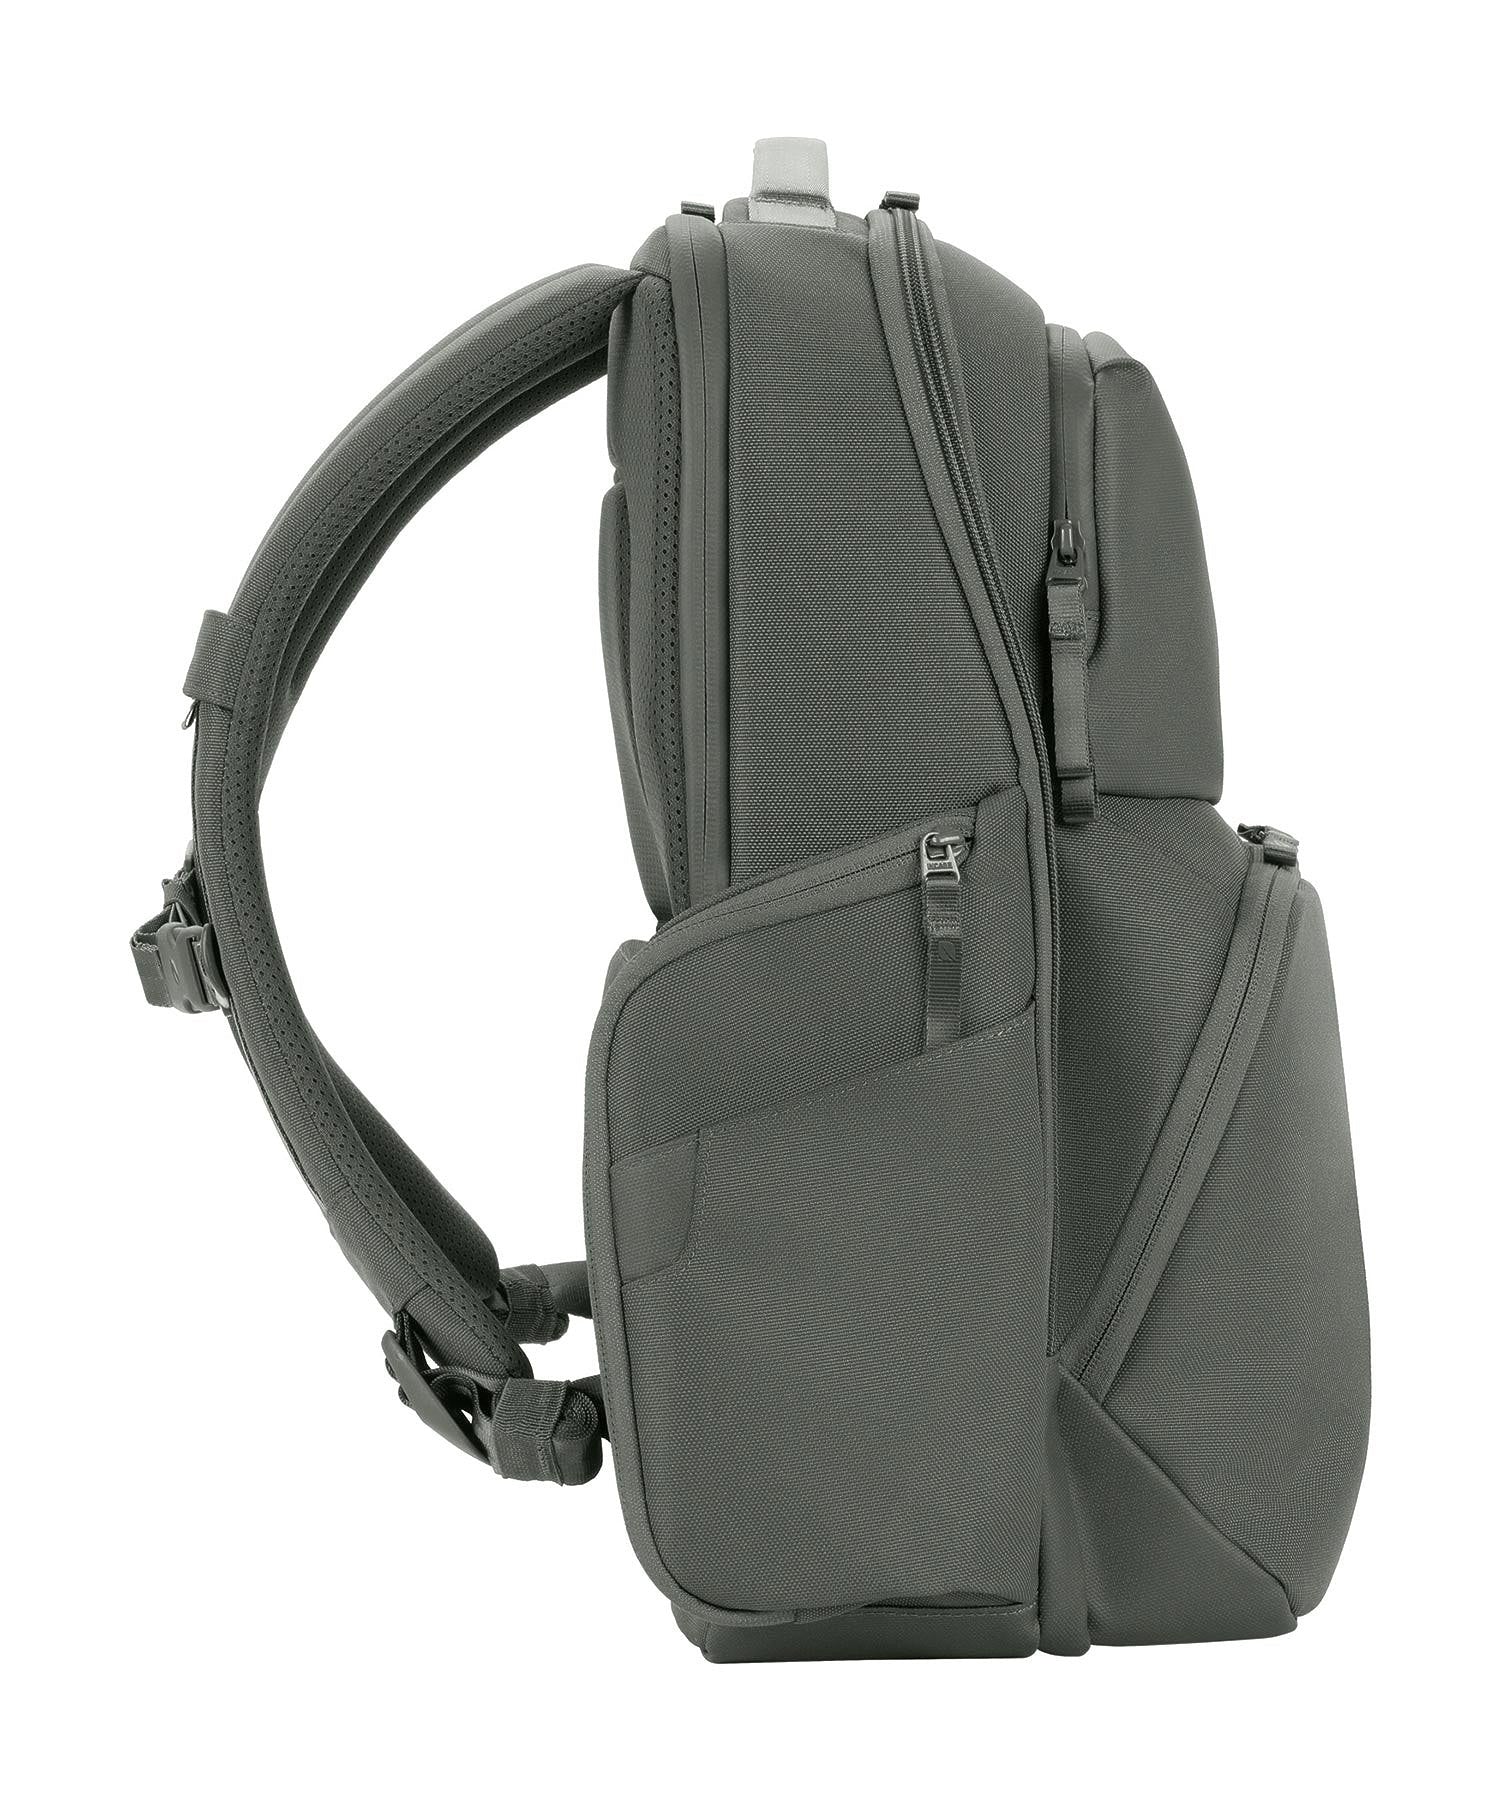 INCO100683-SIV Incase A R C Commuter Pack - Smoked Ivy